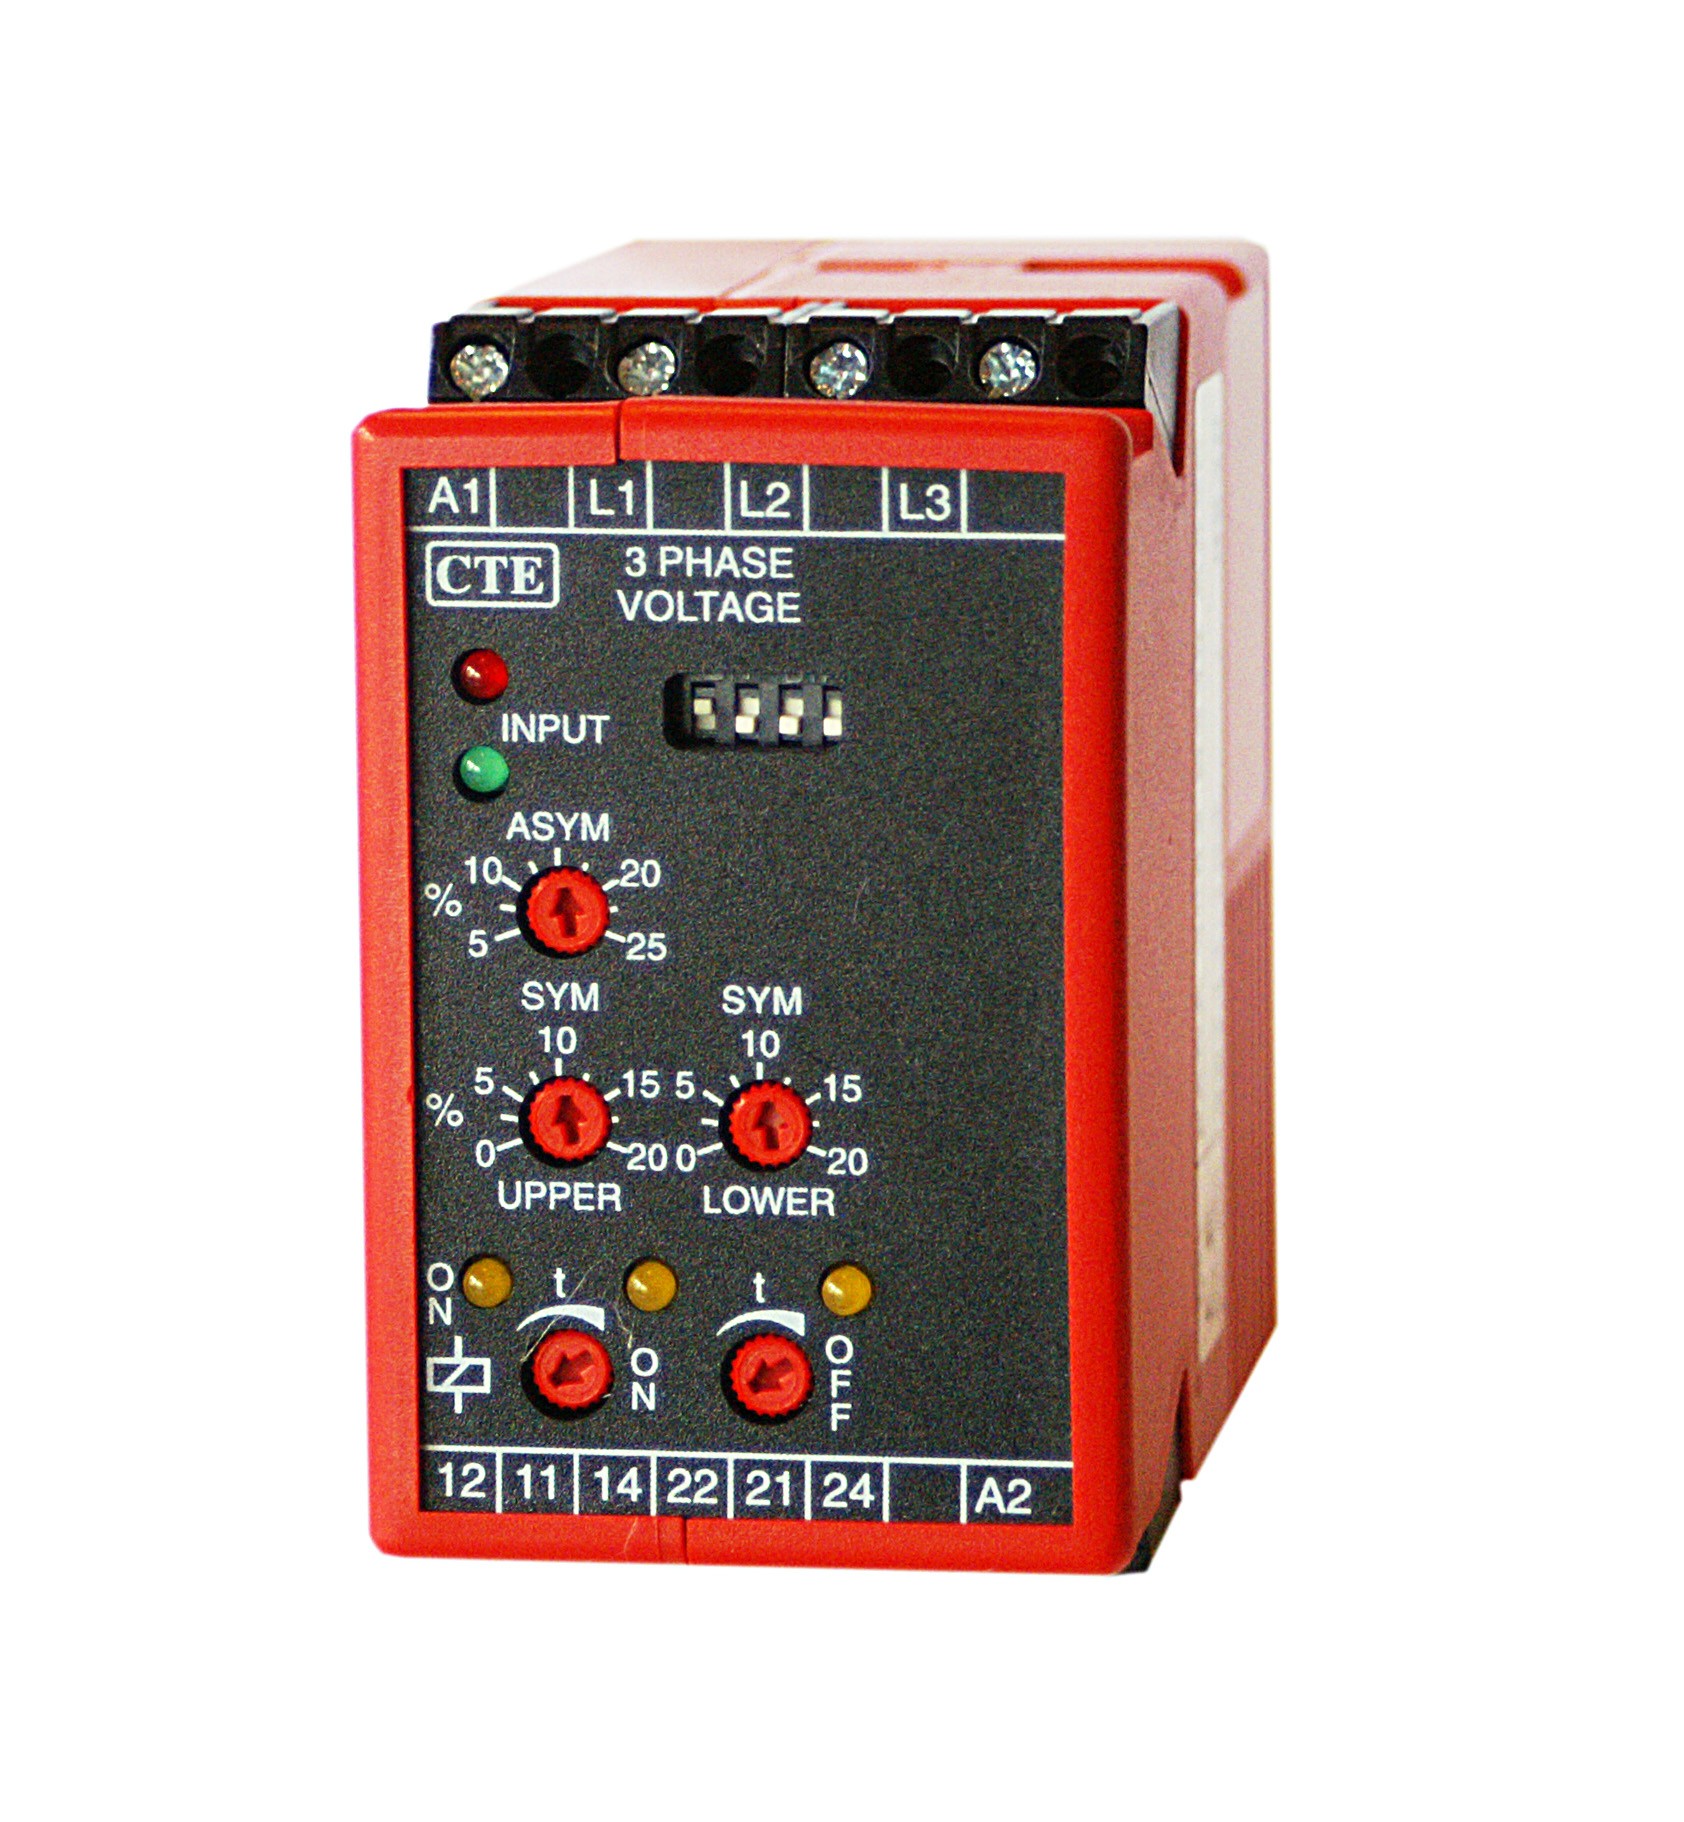 Phase control. Voltage Controller. Tension Controller. Phase Control relay. Ds8337 контролер напряжения.